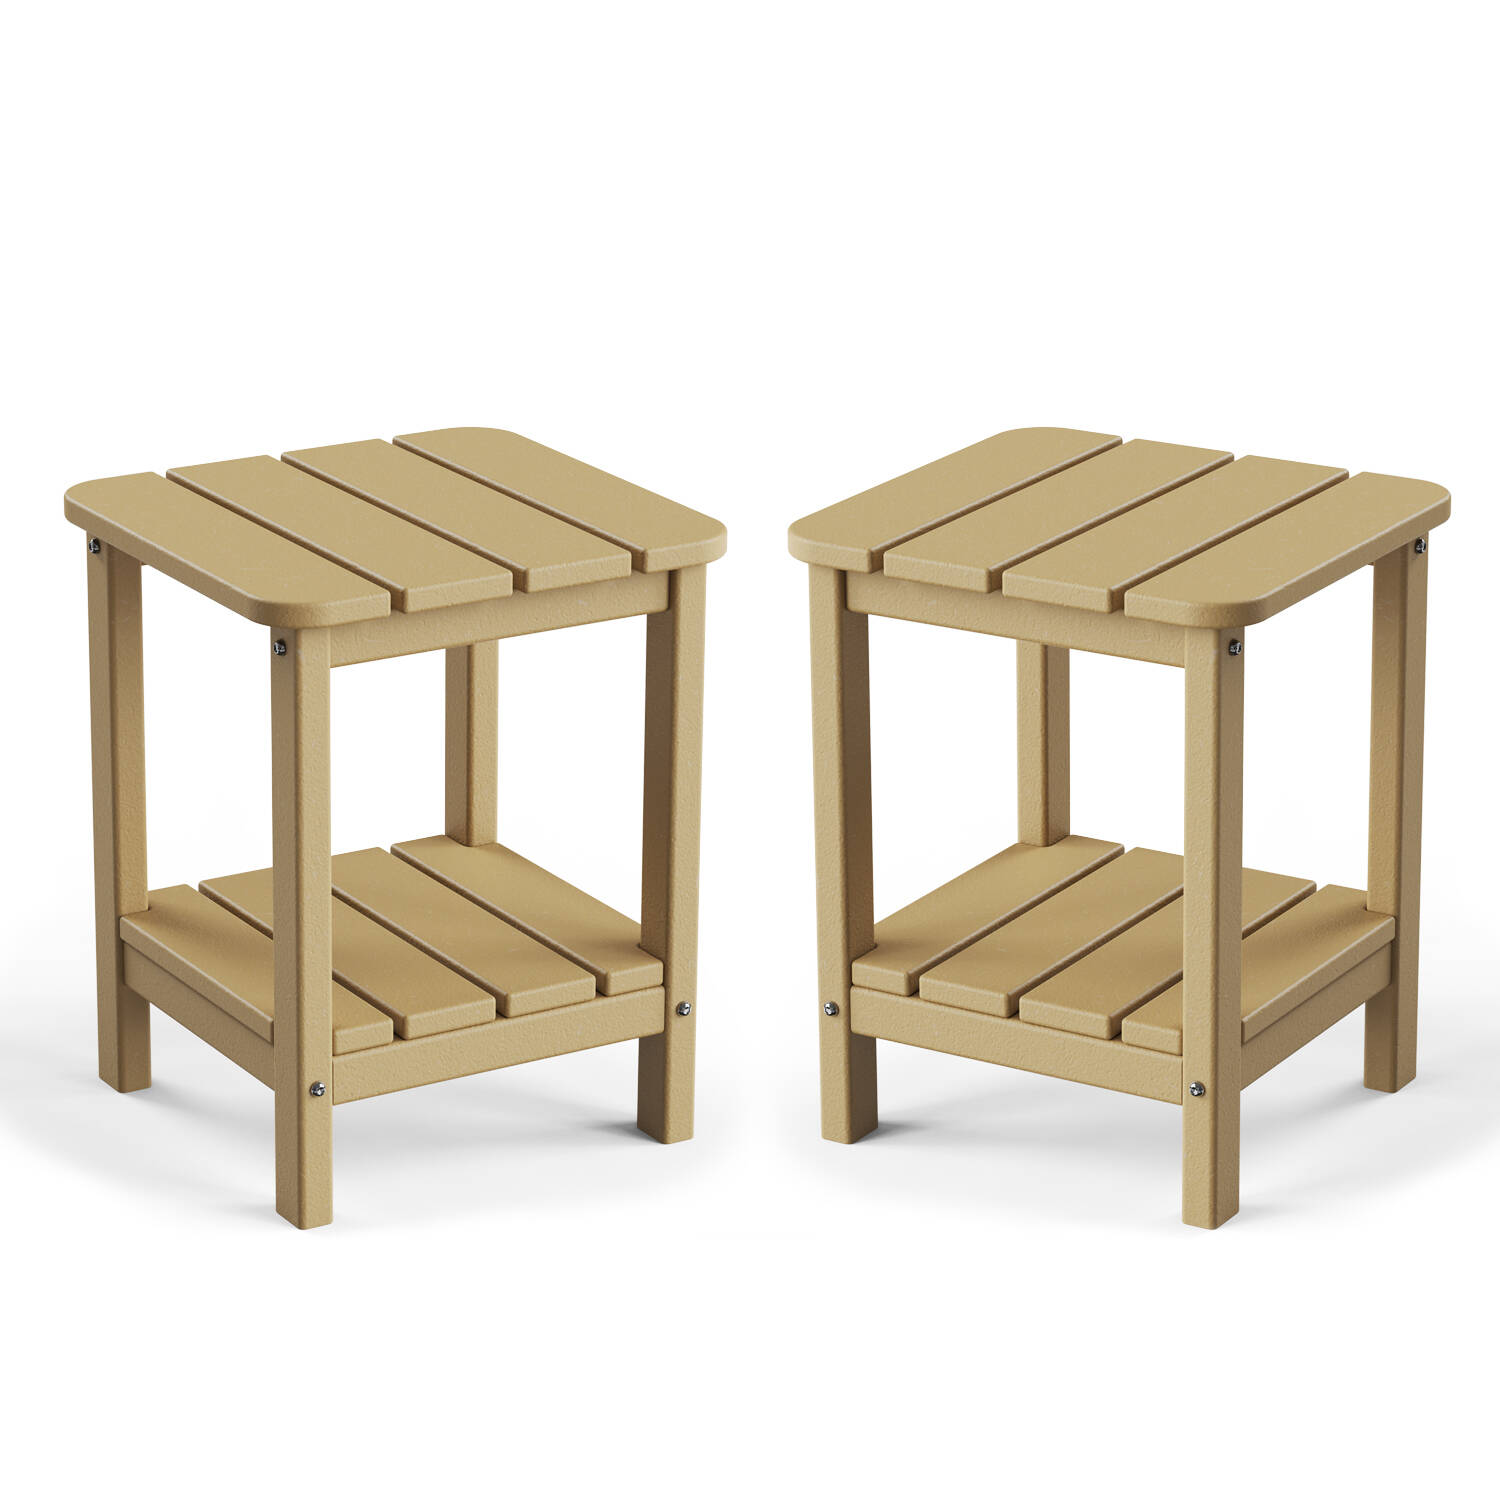 Adirondack Outdoor Side Table 2 Pack(Yellow).jpg